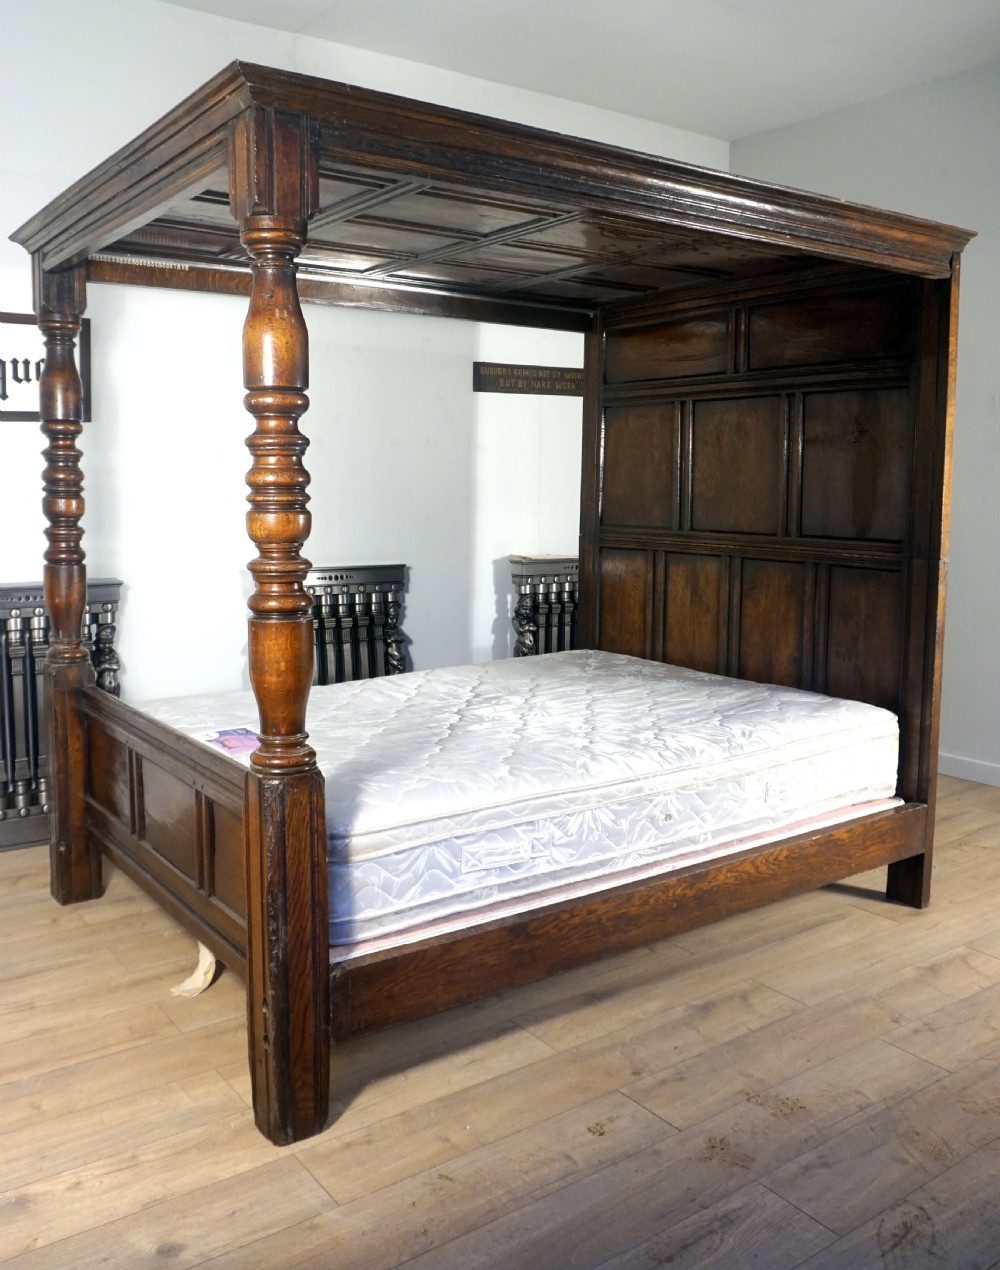 fantastic solid oak bed recondtituted from period oak panels